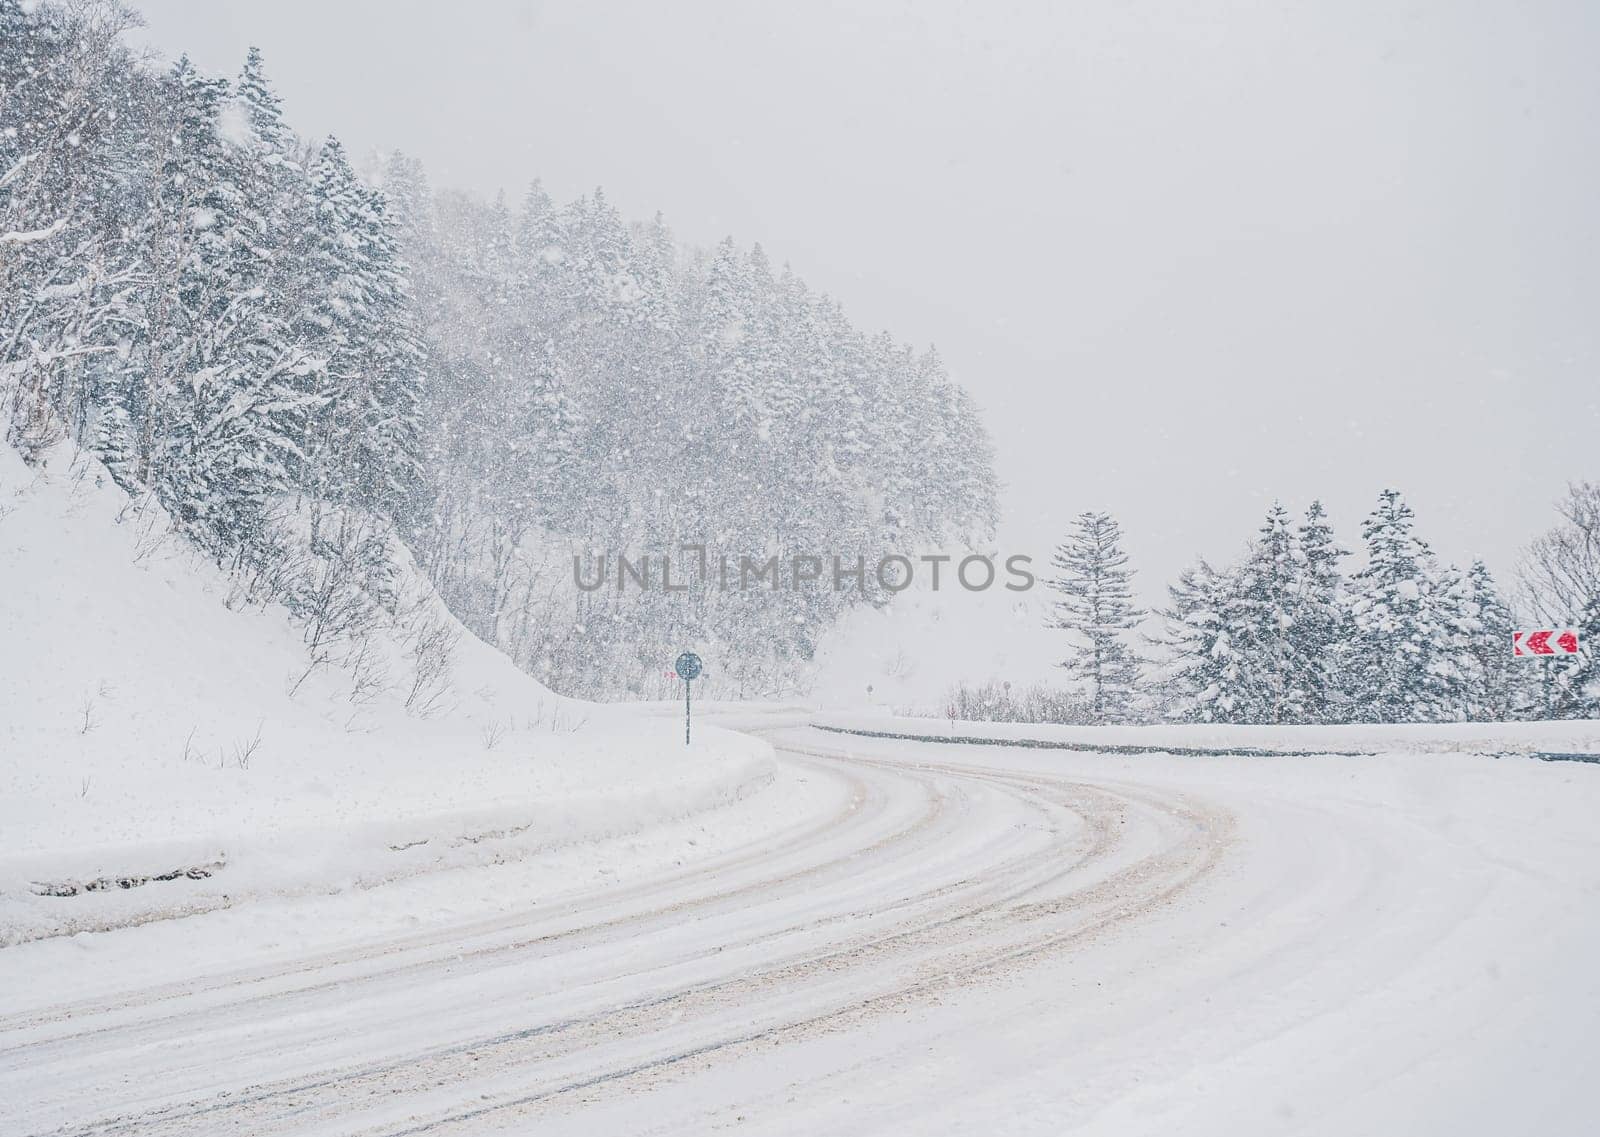 Winter snowstorm on a mountain road with dense forest in broad daylight by Busker